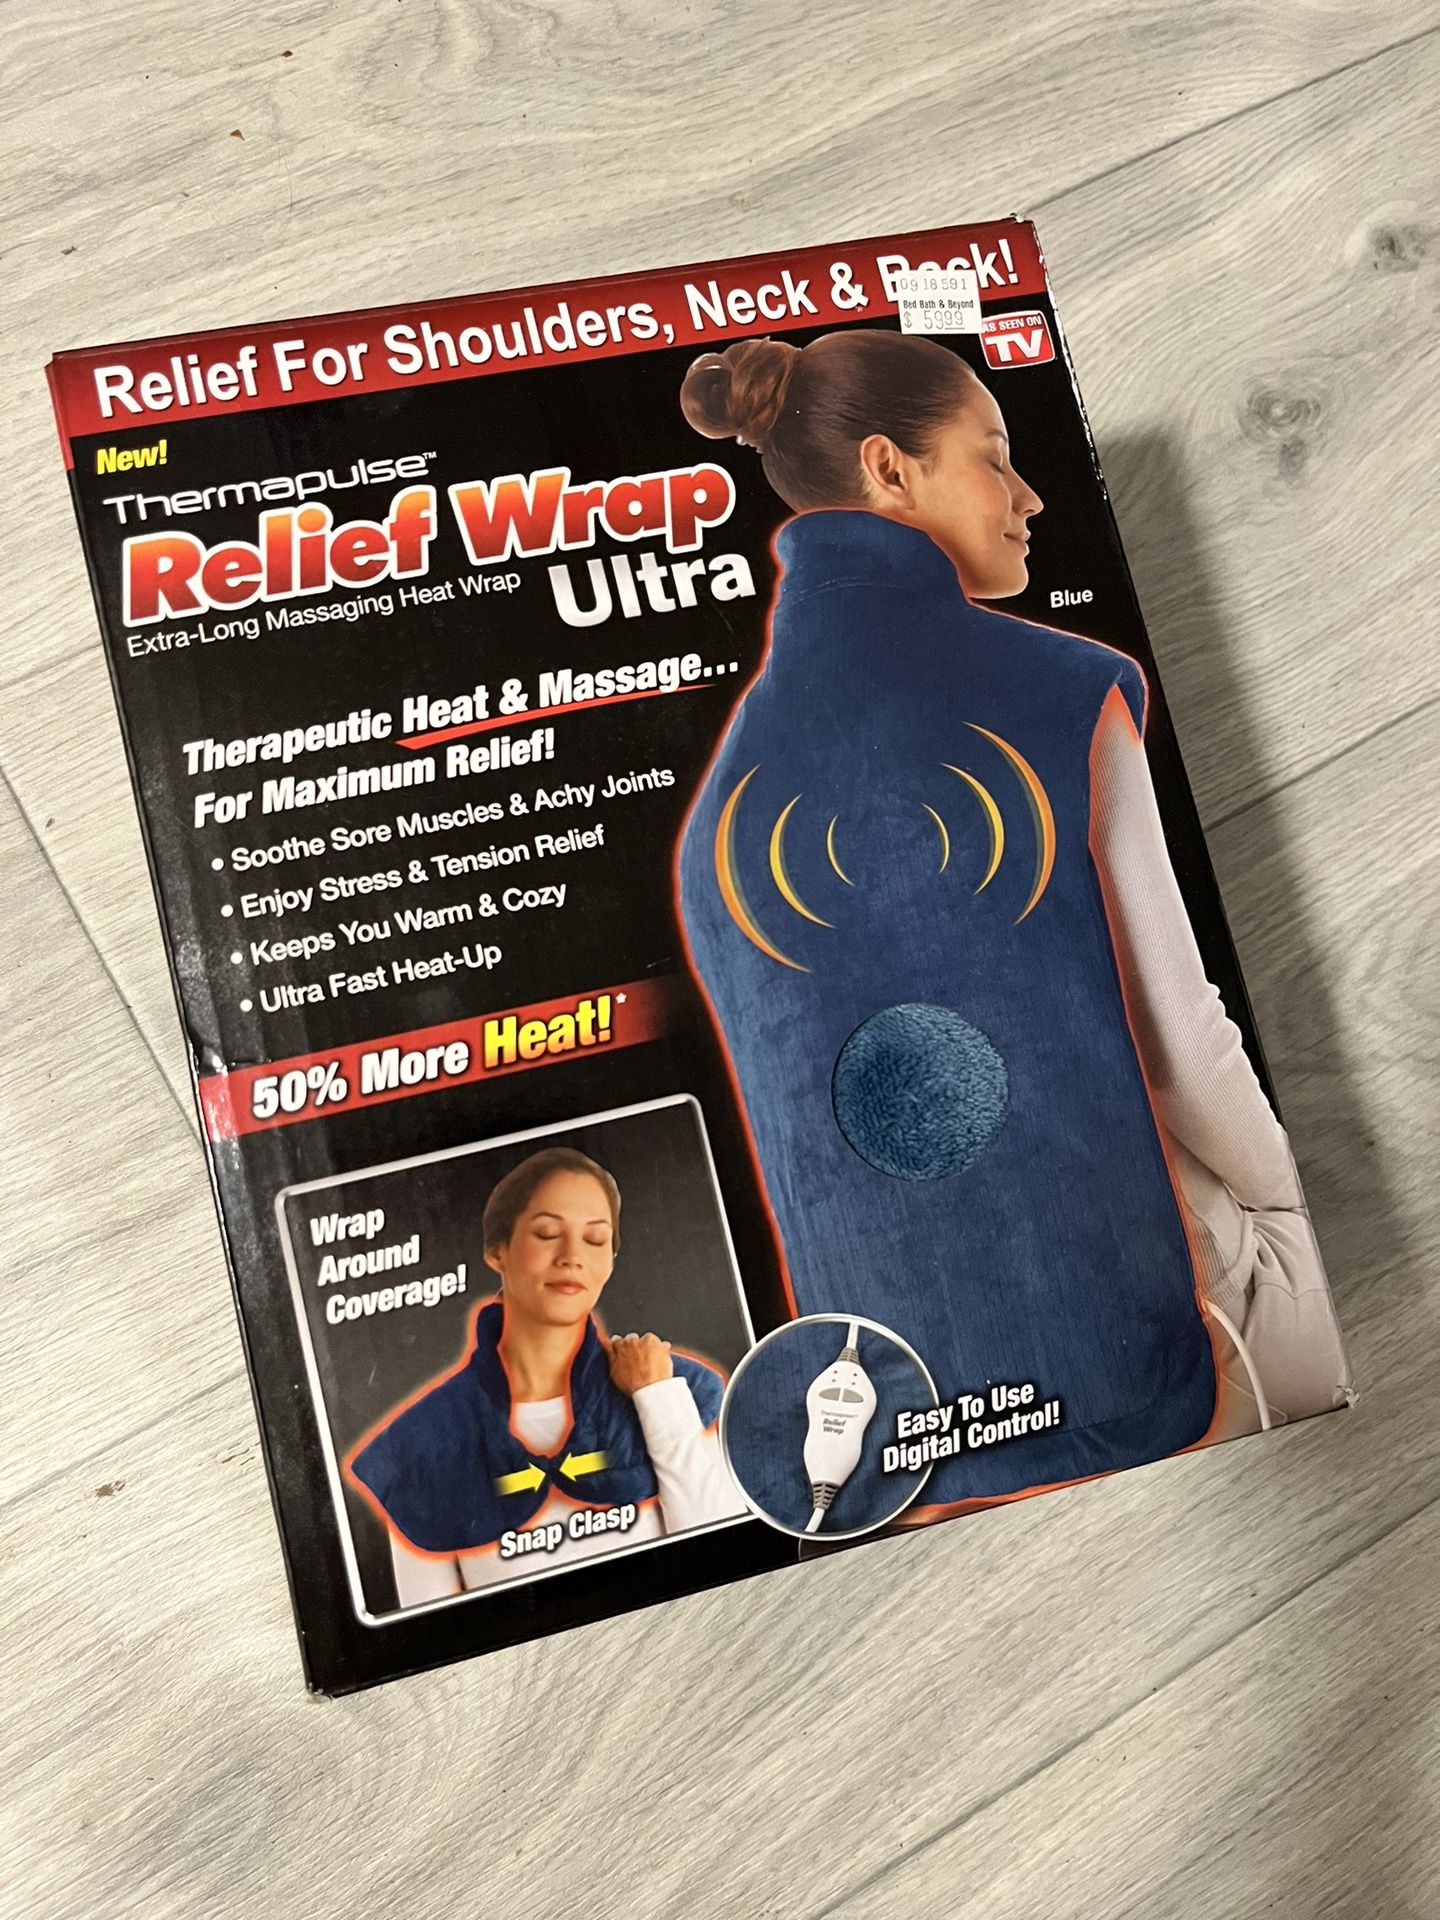 Heat Massage Relief For Shoulders Near New 